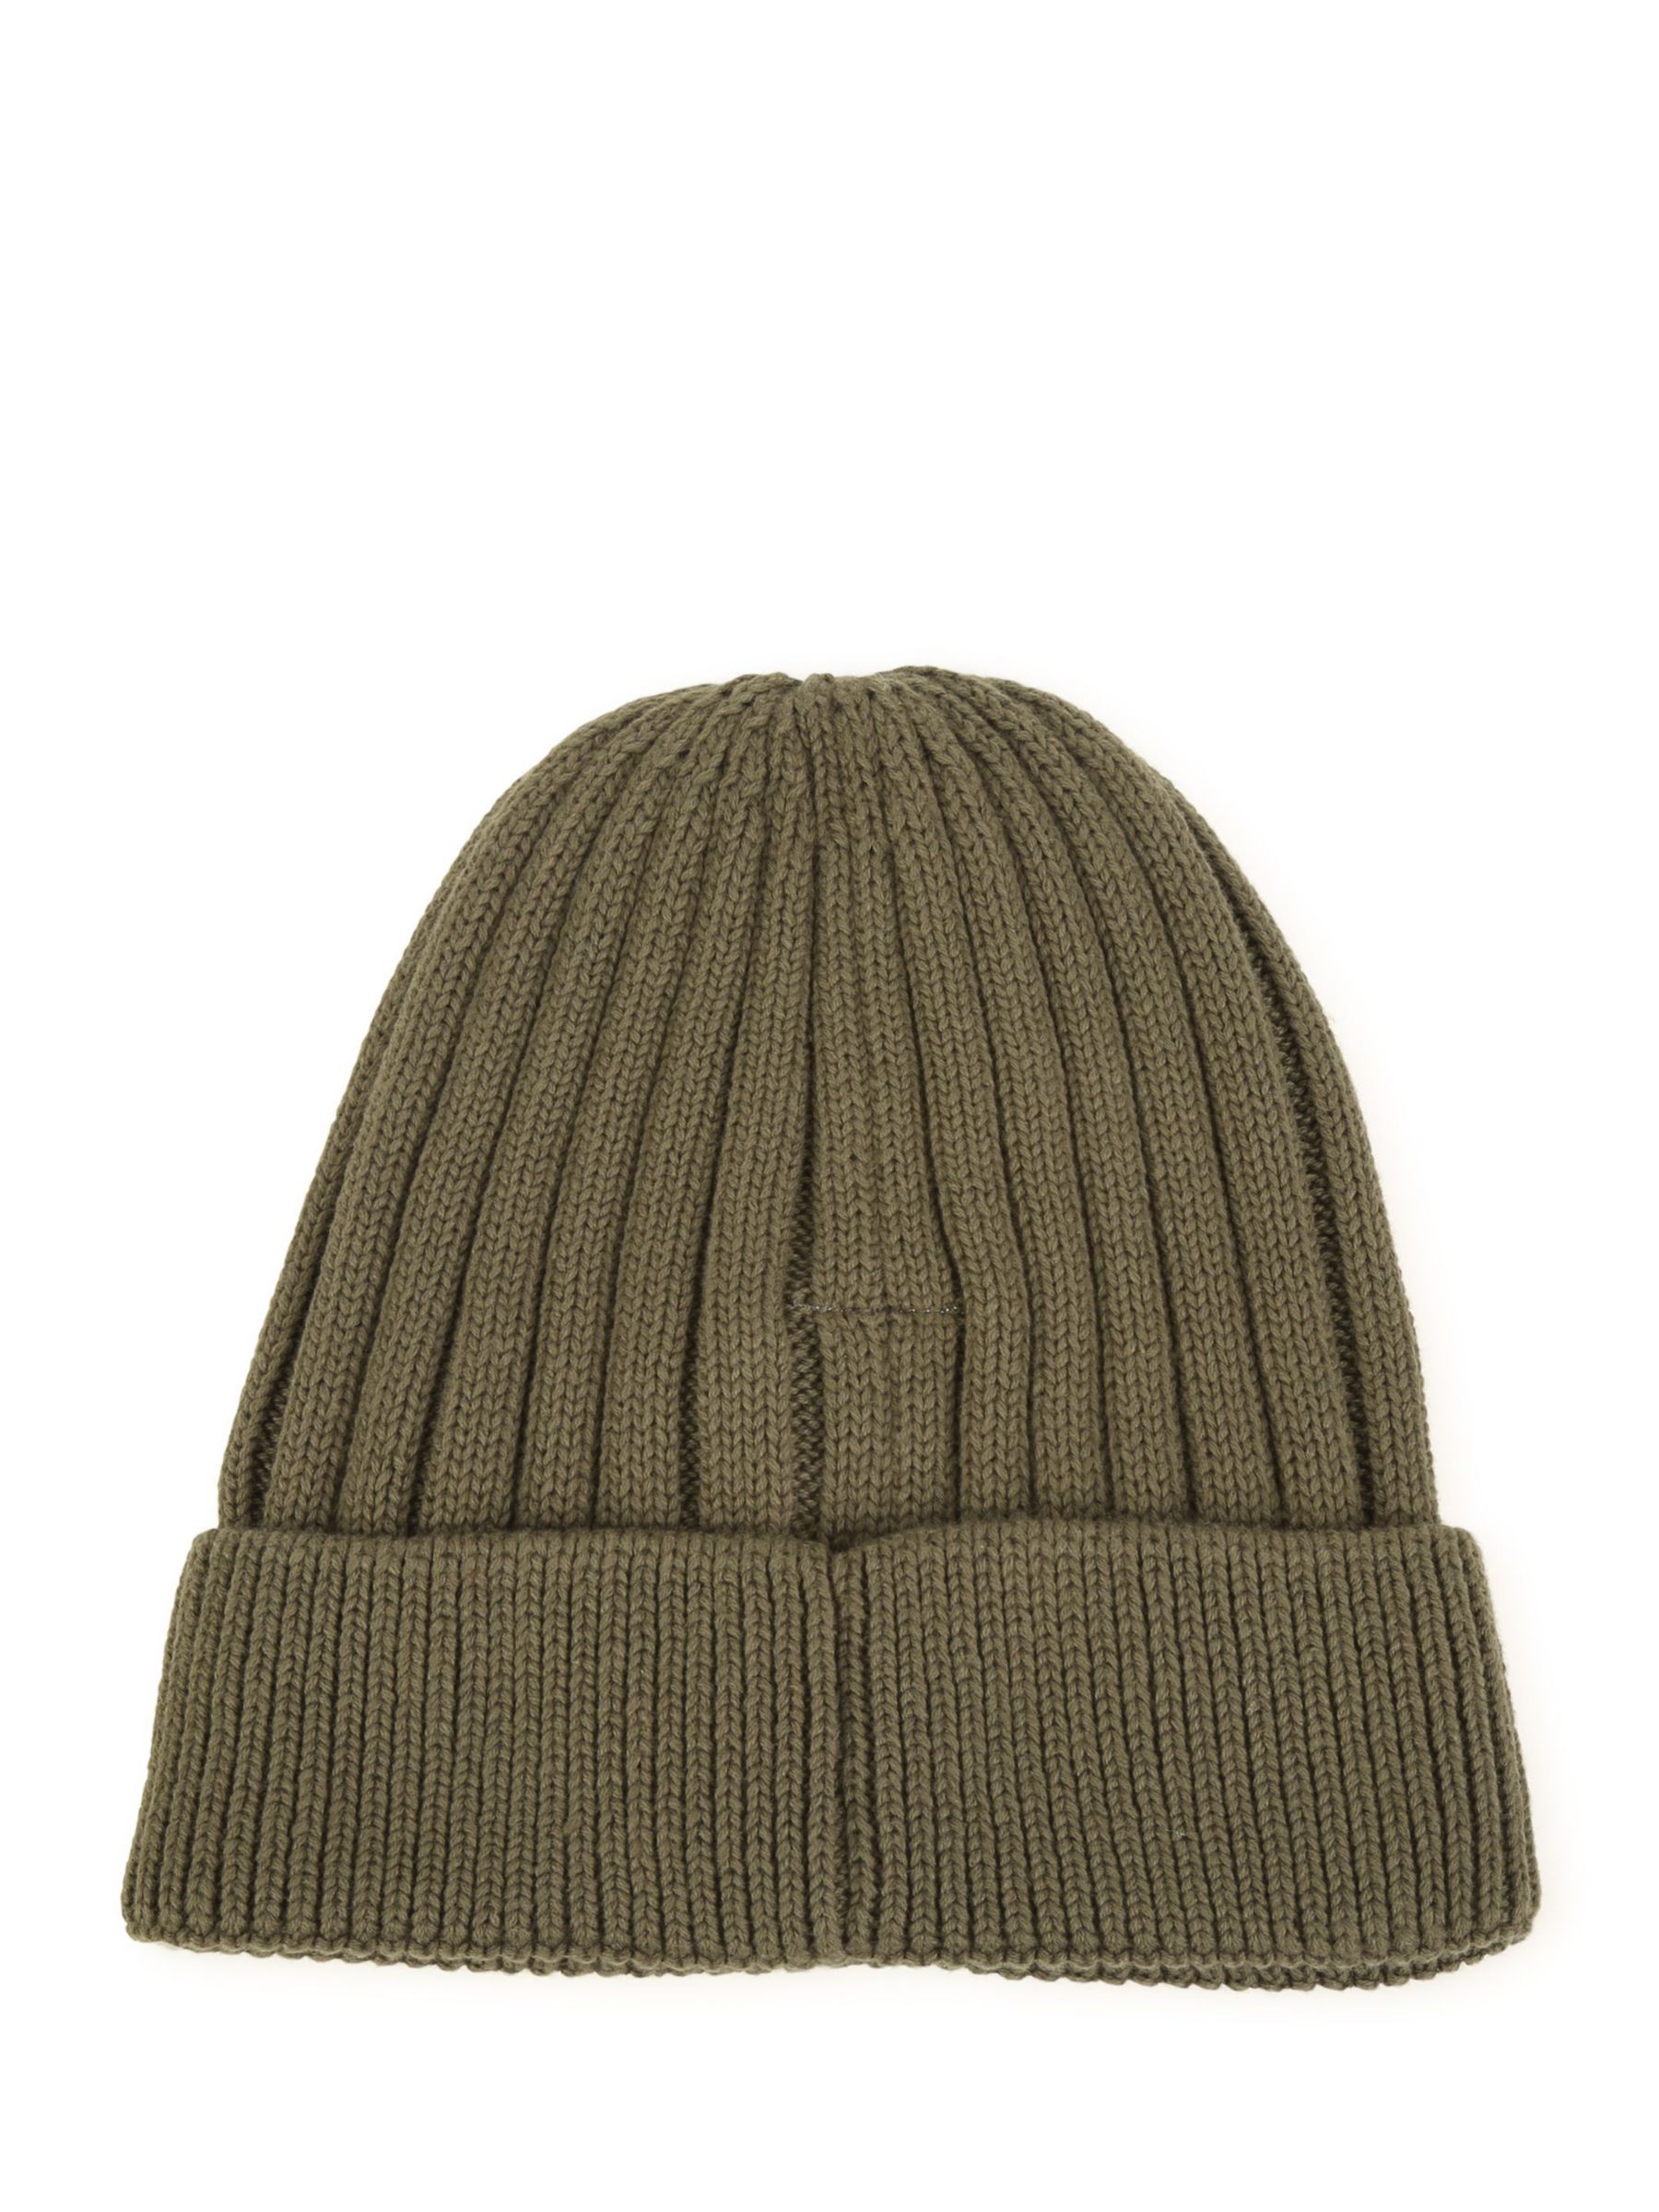 Buy Timberland Kids' Cotton Pull On Hat Online at johnlewis.com